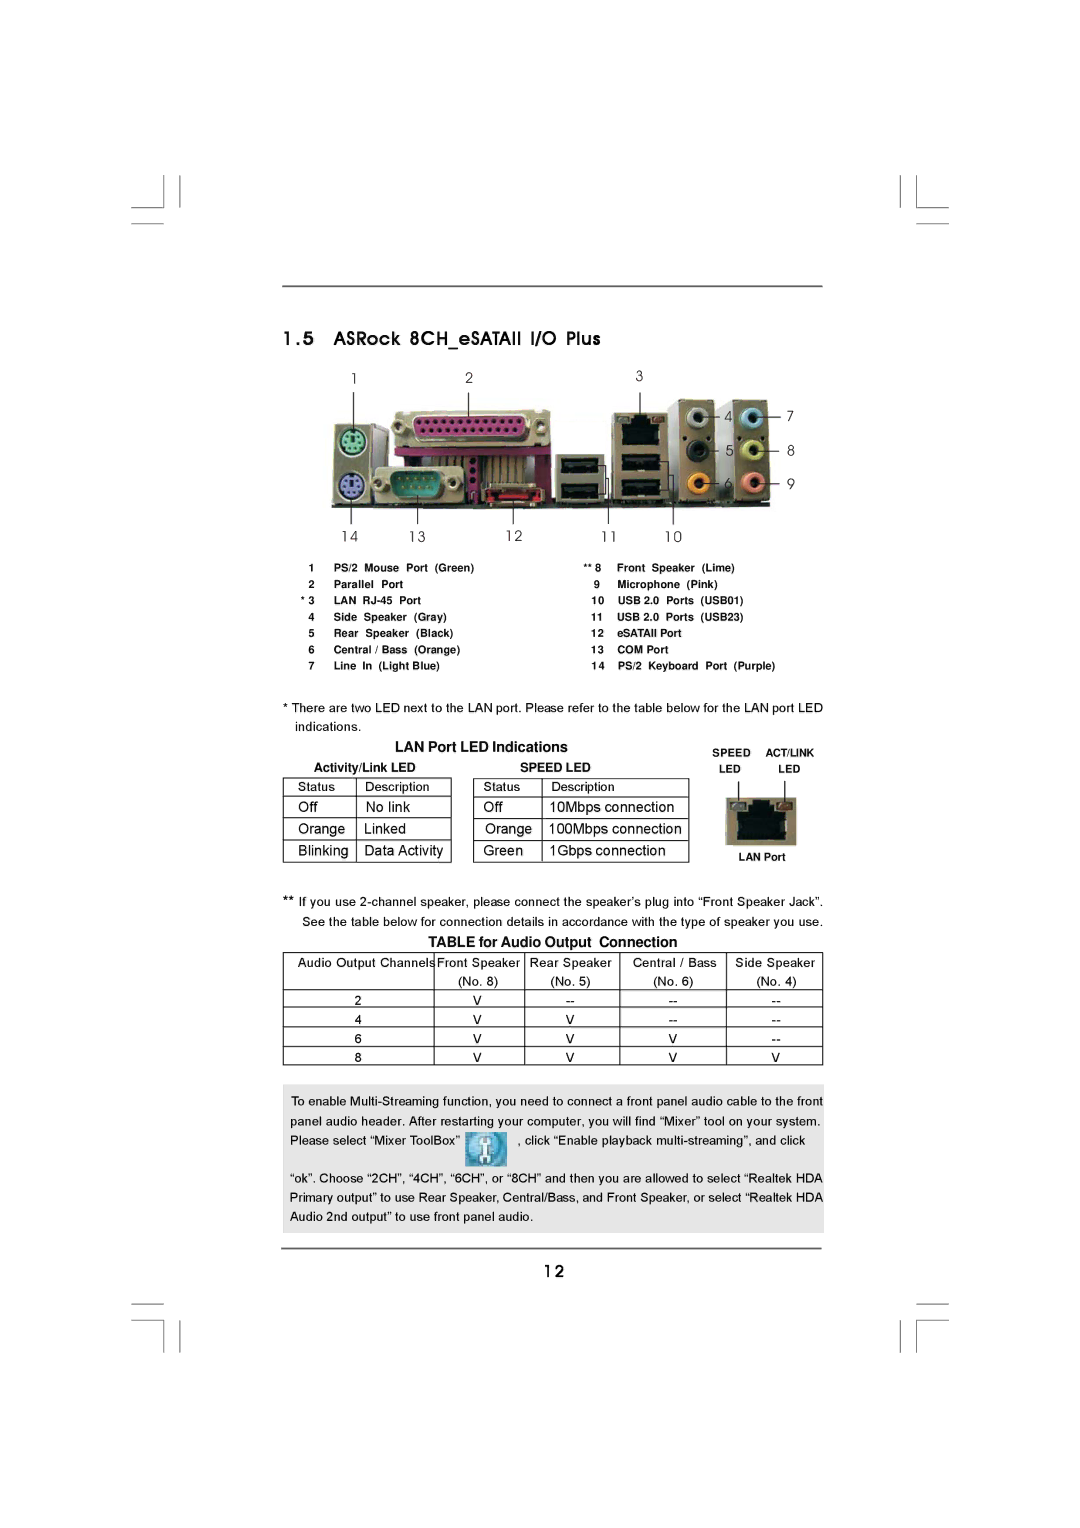 ASRock 4CORE1600TWINS-P35D manual ASRock 8CHeSATAII I/O Plus, LAN Port LED Indications, Table for Audio Output Connection 